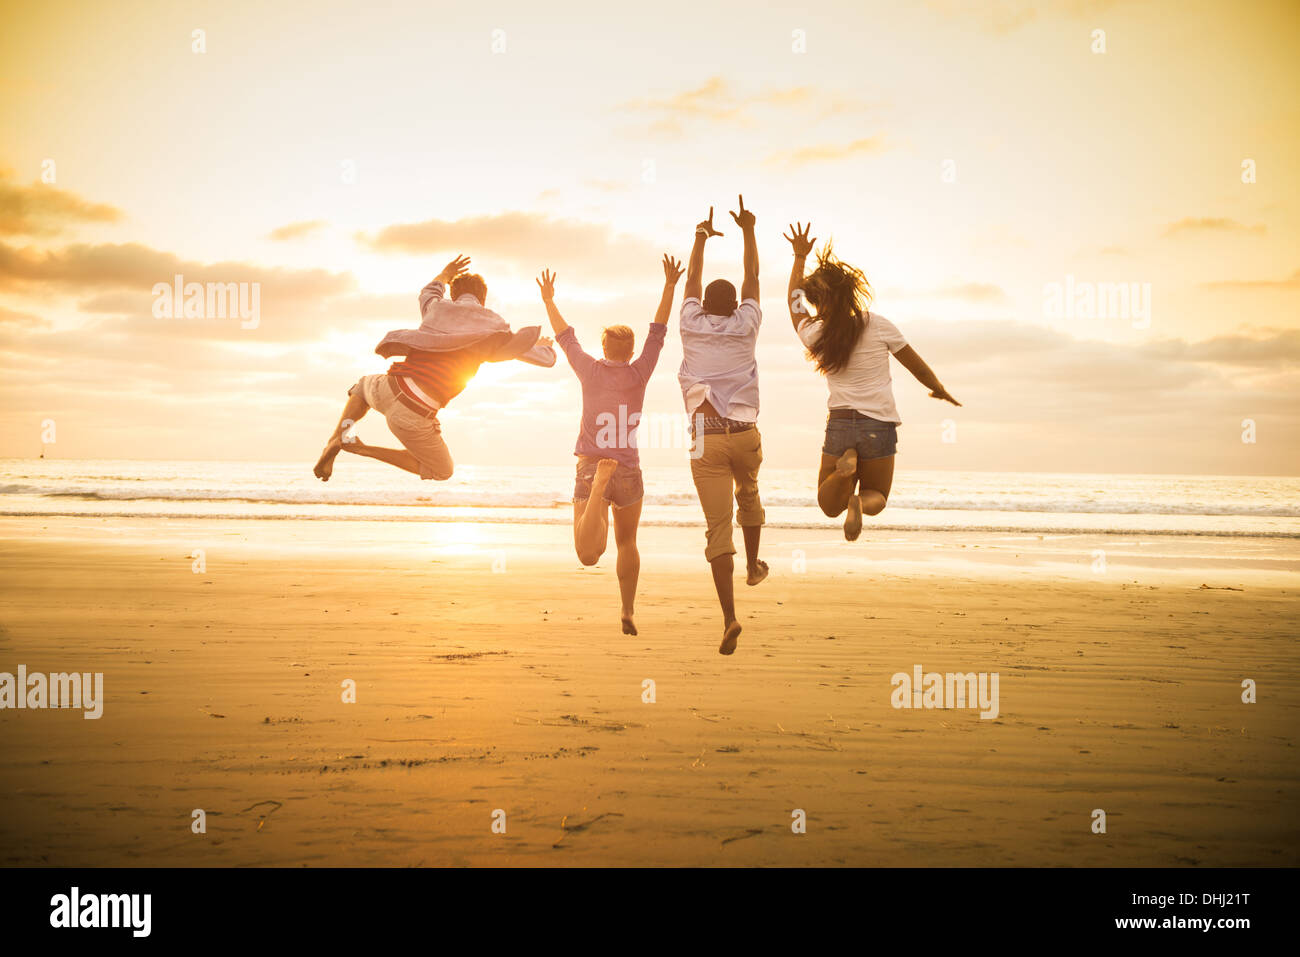 Young people jumping on Mission Beach, San Diego, California, USA Stock Photo